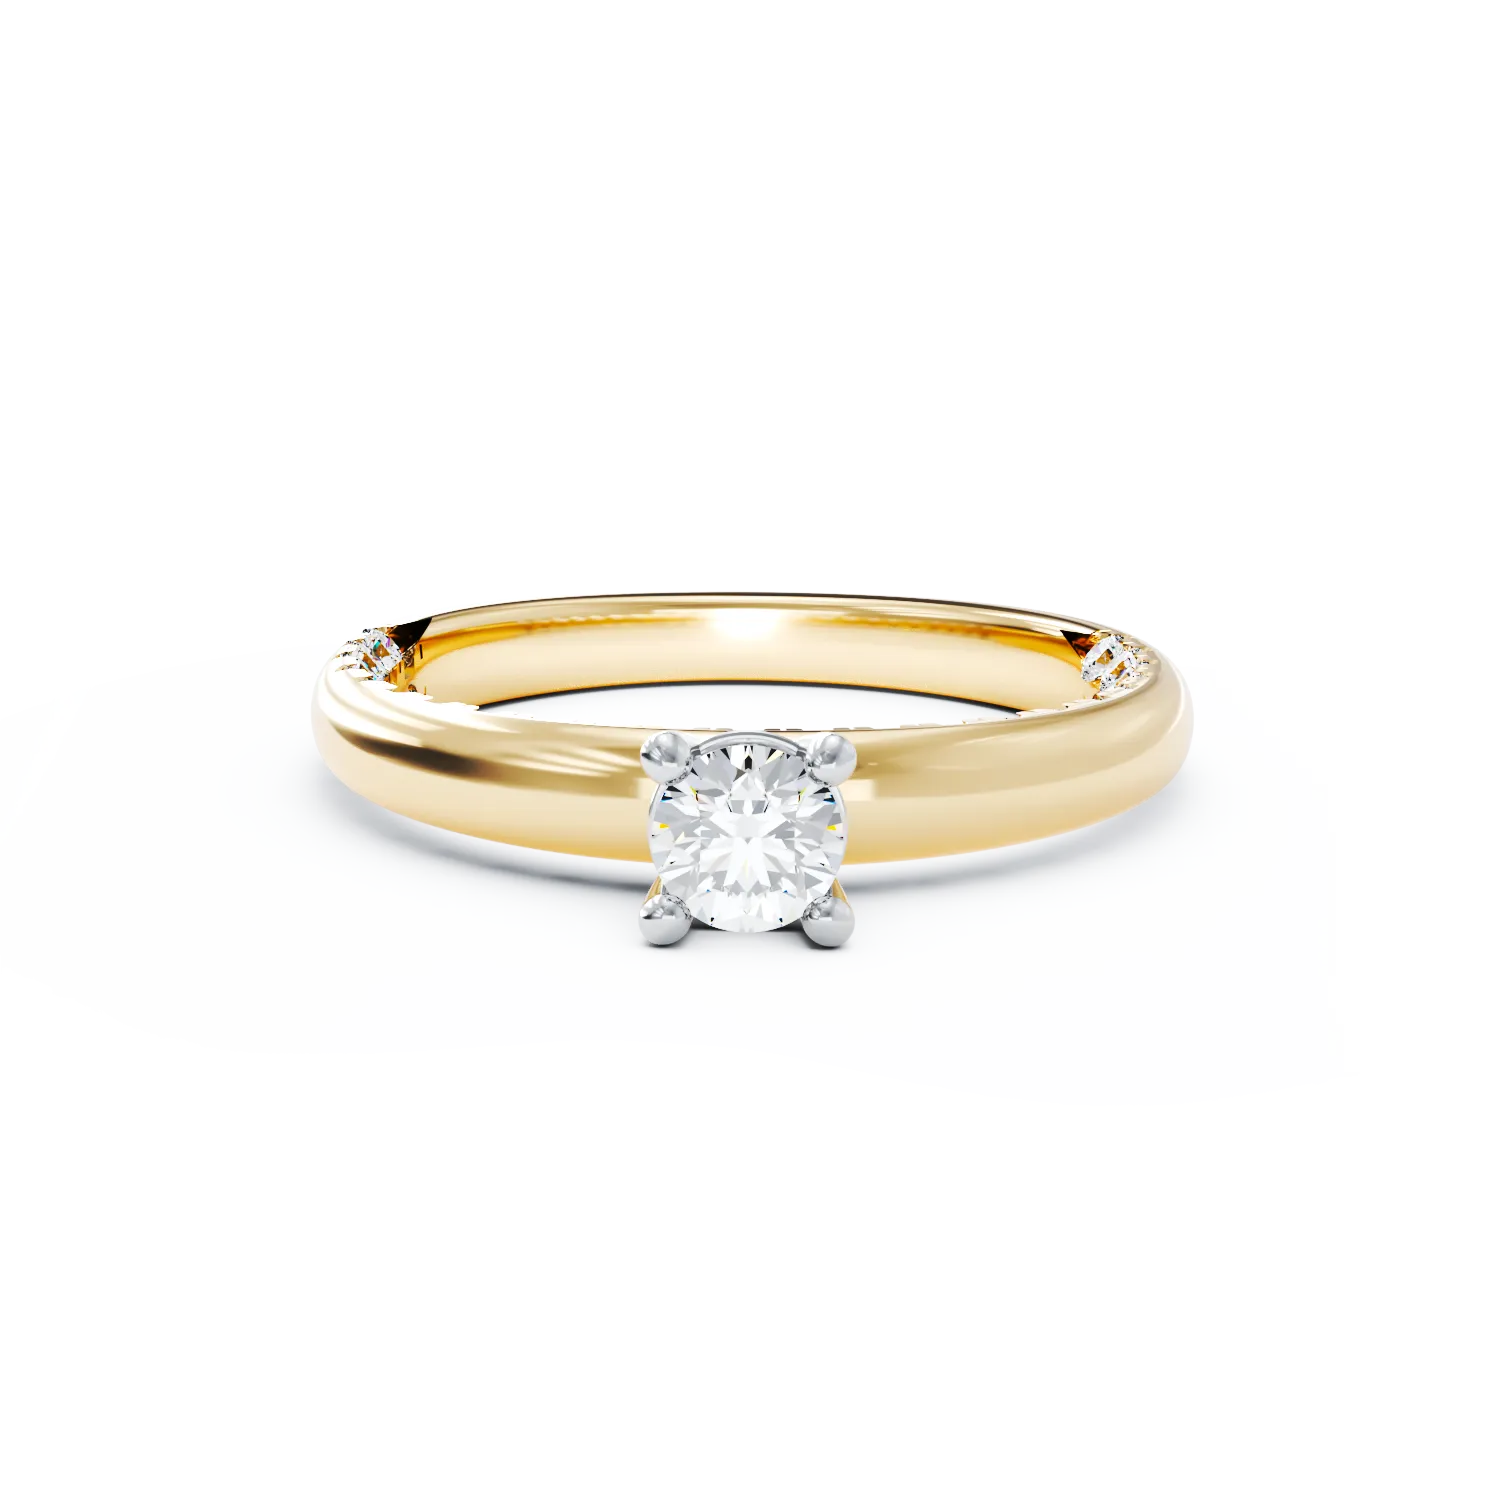 18K yellow gold engagement ring with 0.19ct diamond and 0.21ct diamonds